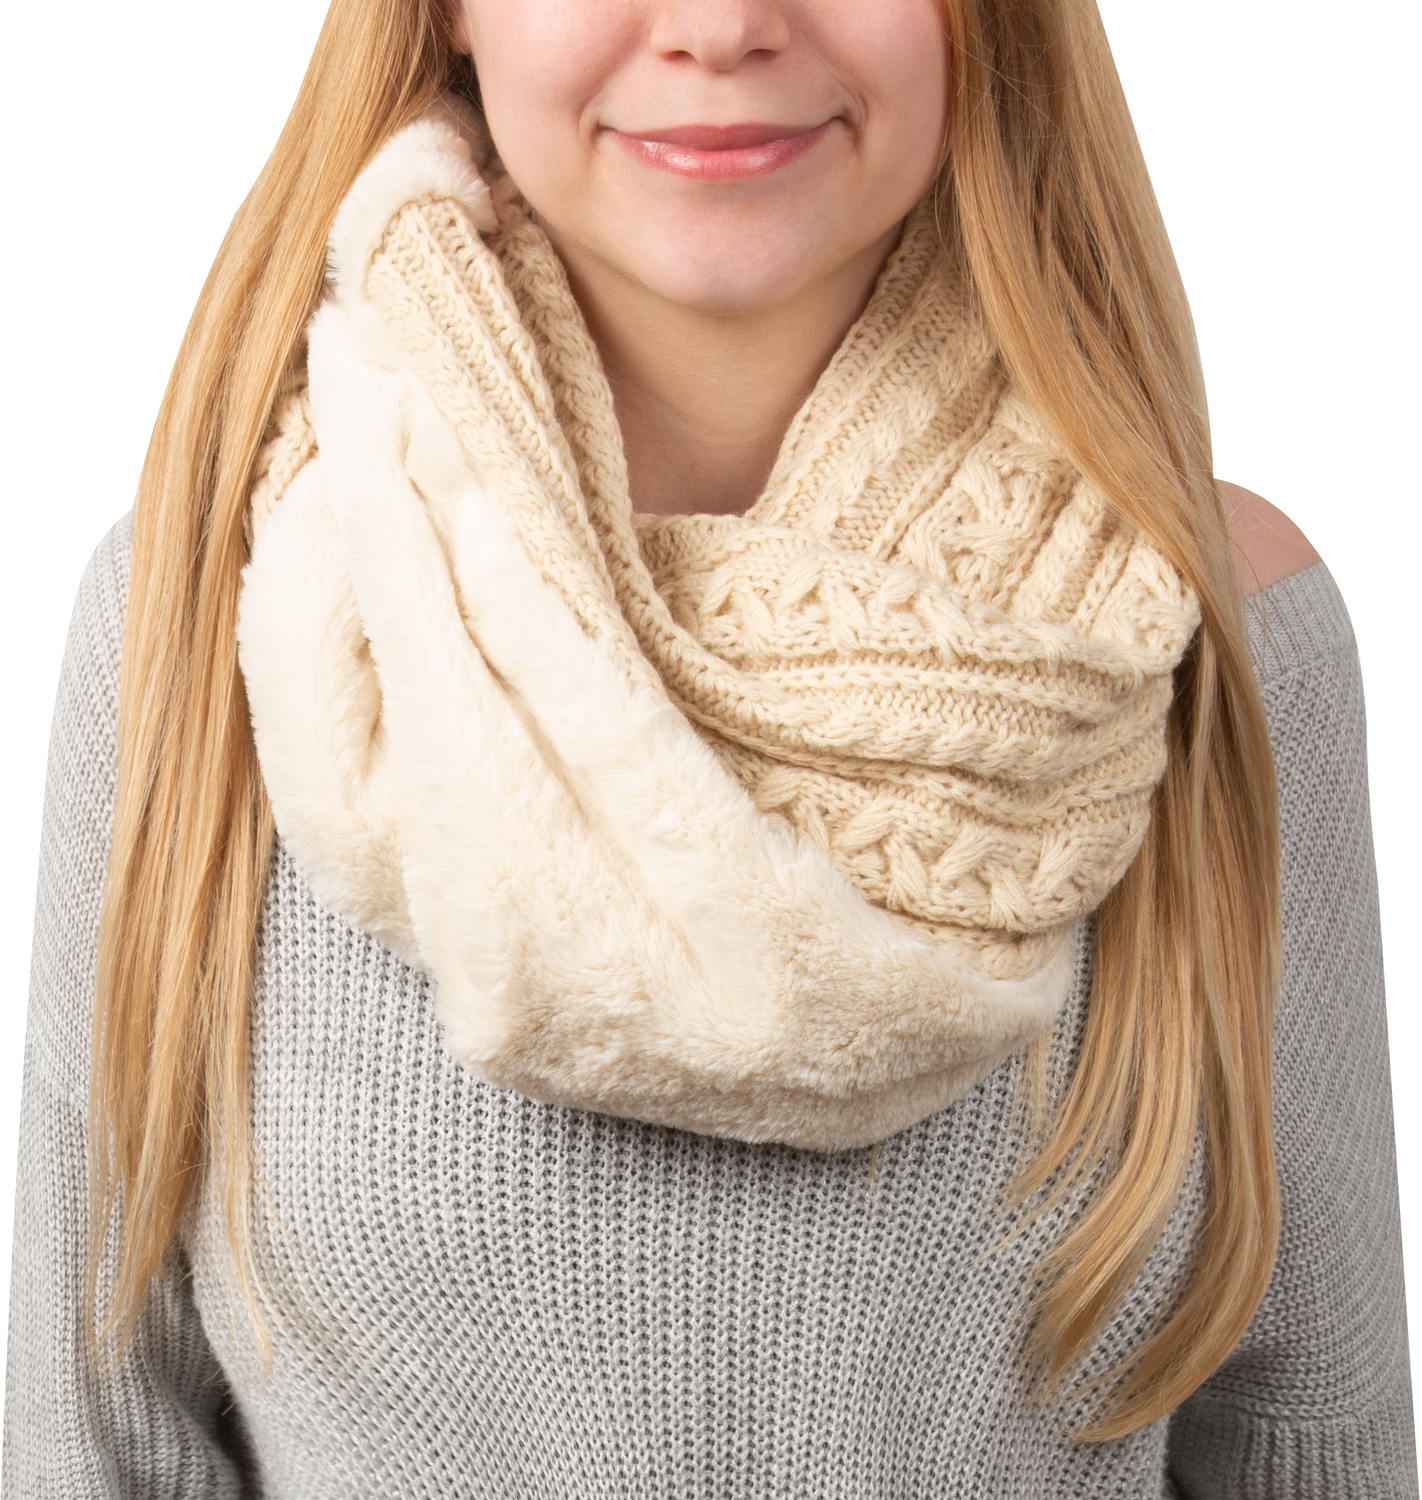 Winter Cream by H2Z Scarves - Winter Cream -  Cable Knit & Faux Fur Infinity Scarf